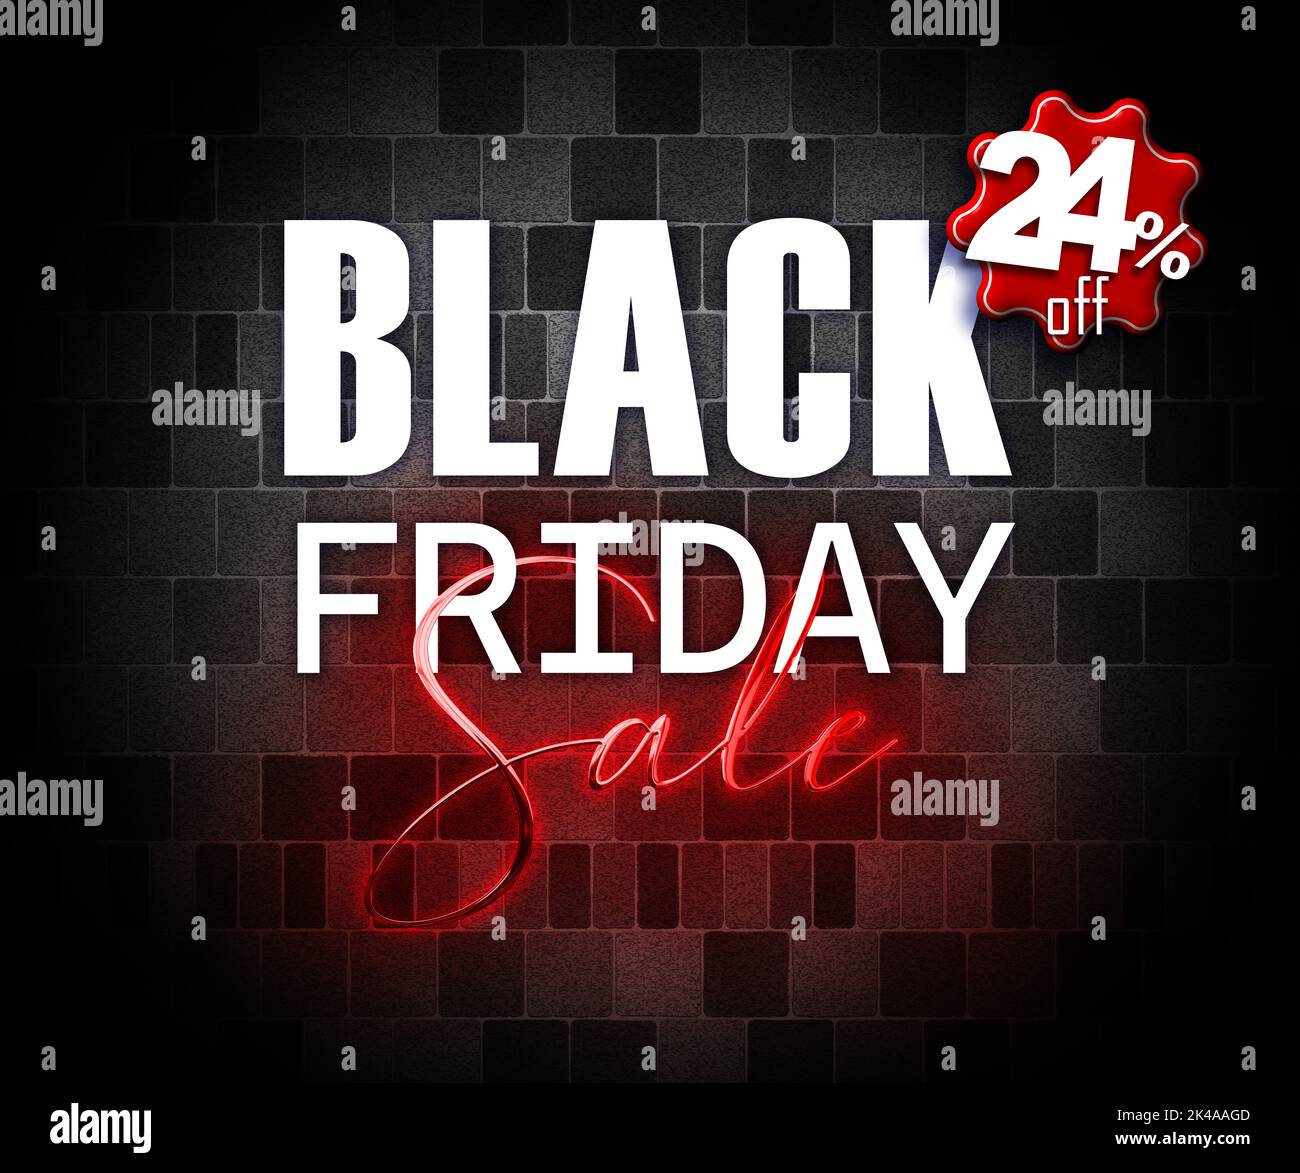 illustration with 3d elements black friday promotion banner 24 percent off sales increase Stock Photo